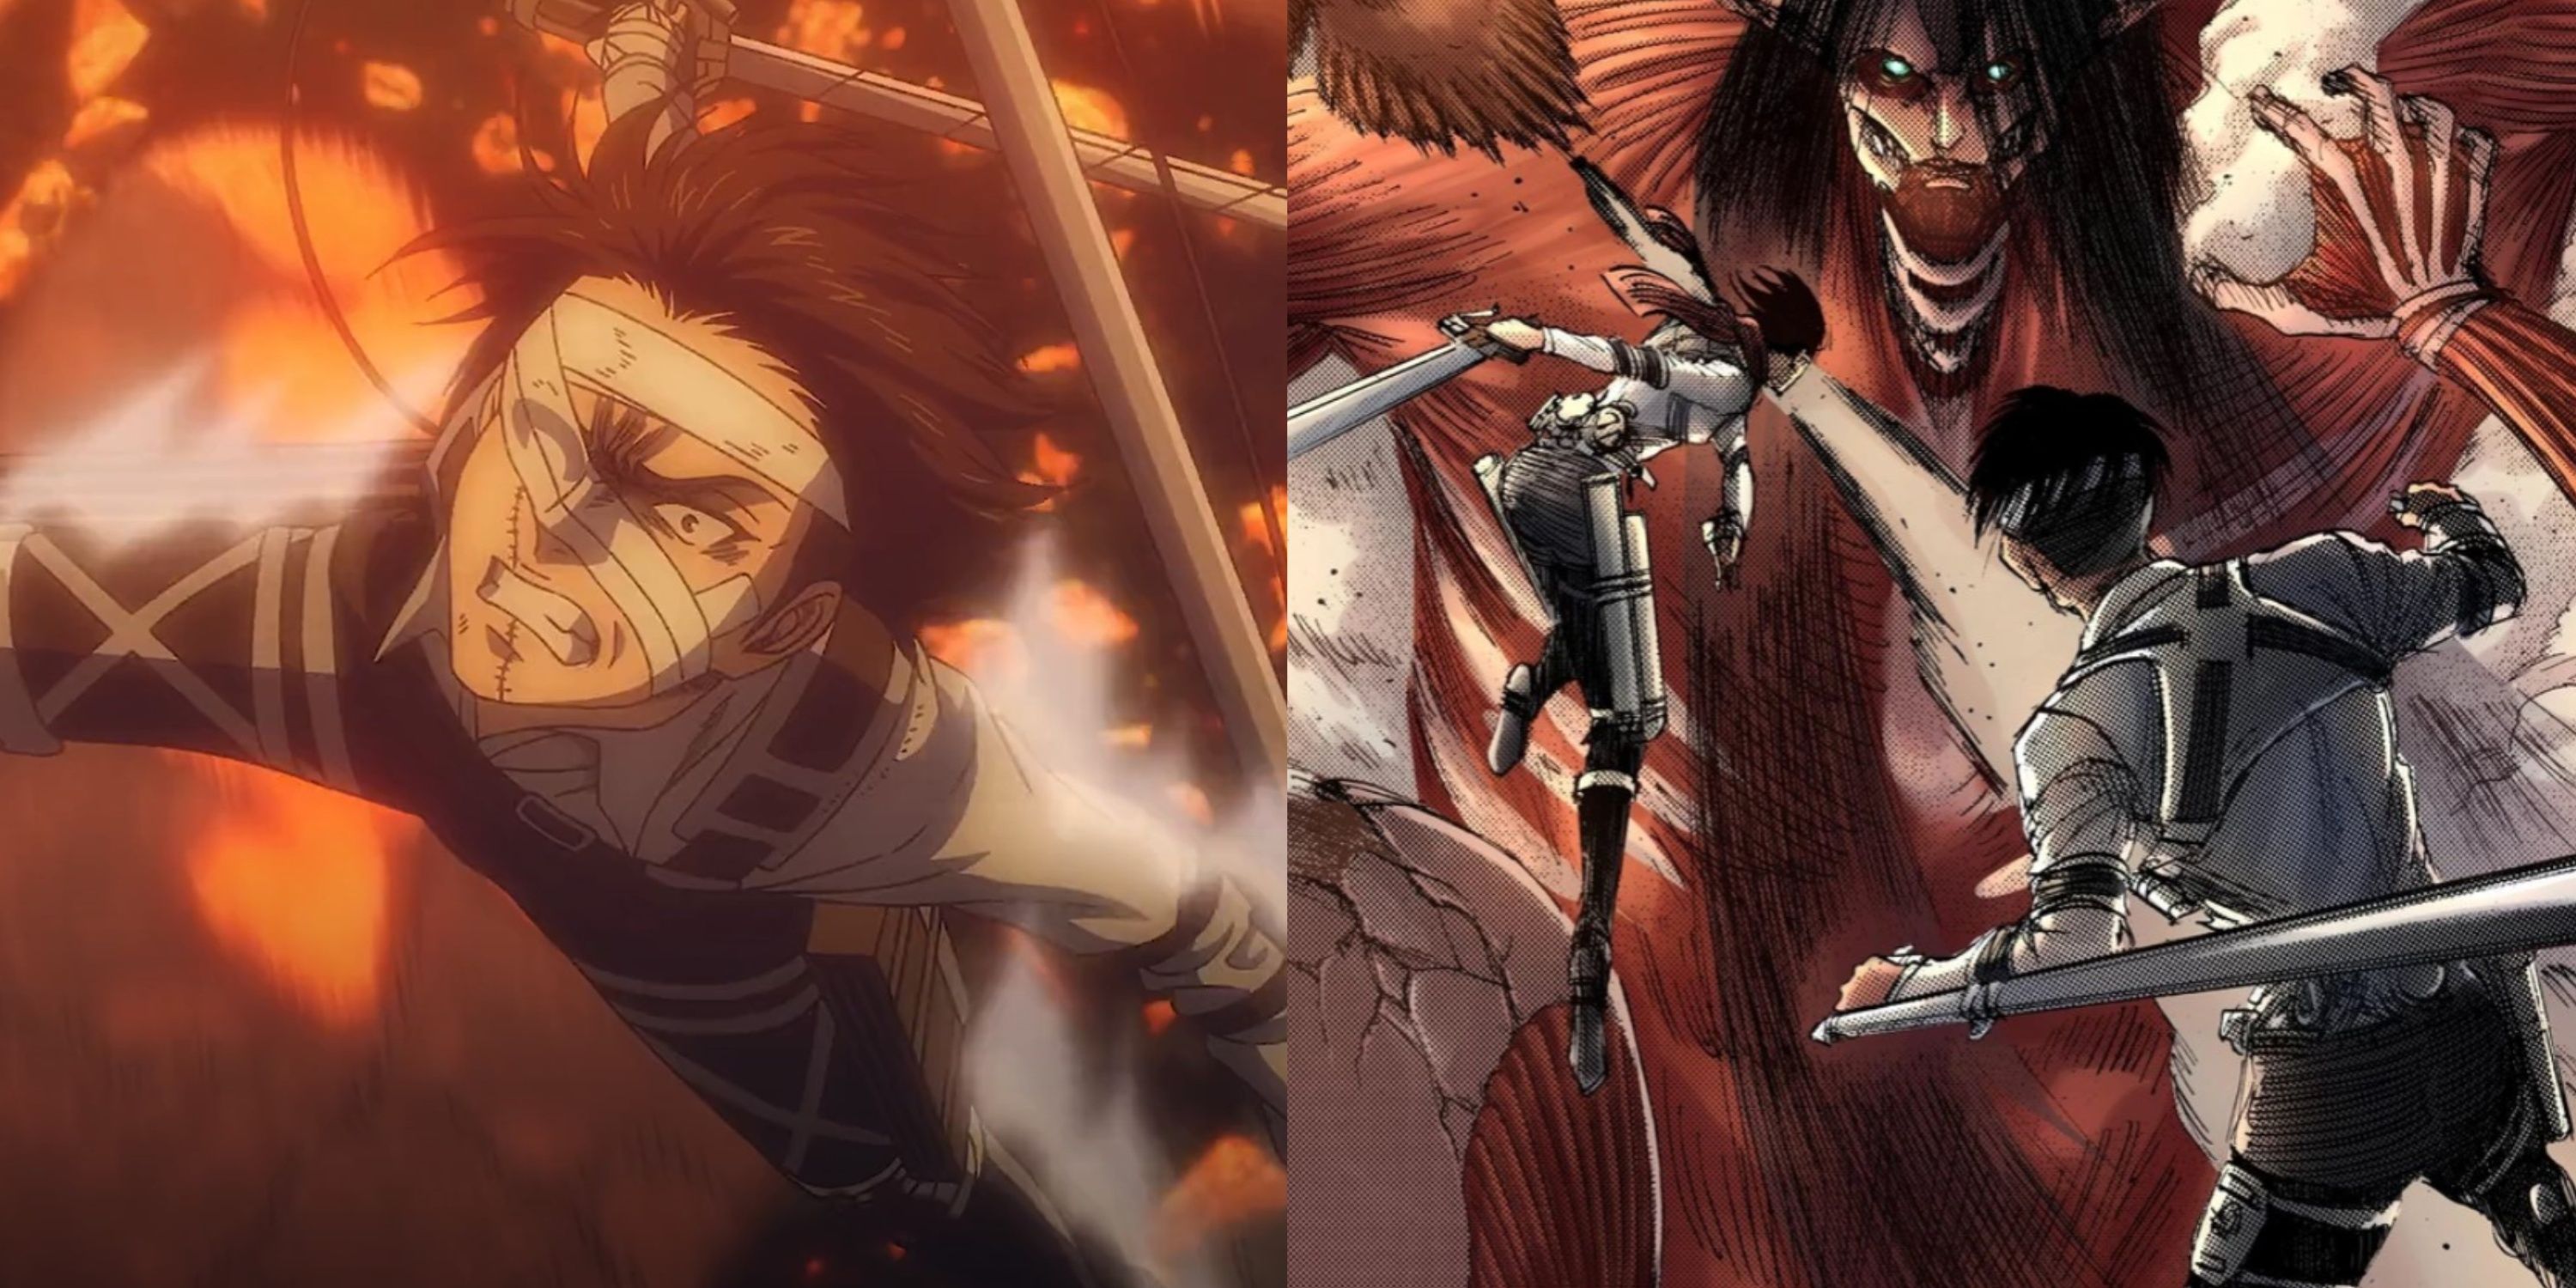 Attack On Titan: Why The Anime’s Finale Fared Better Than The Manga